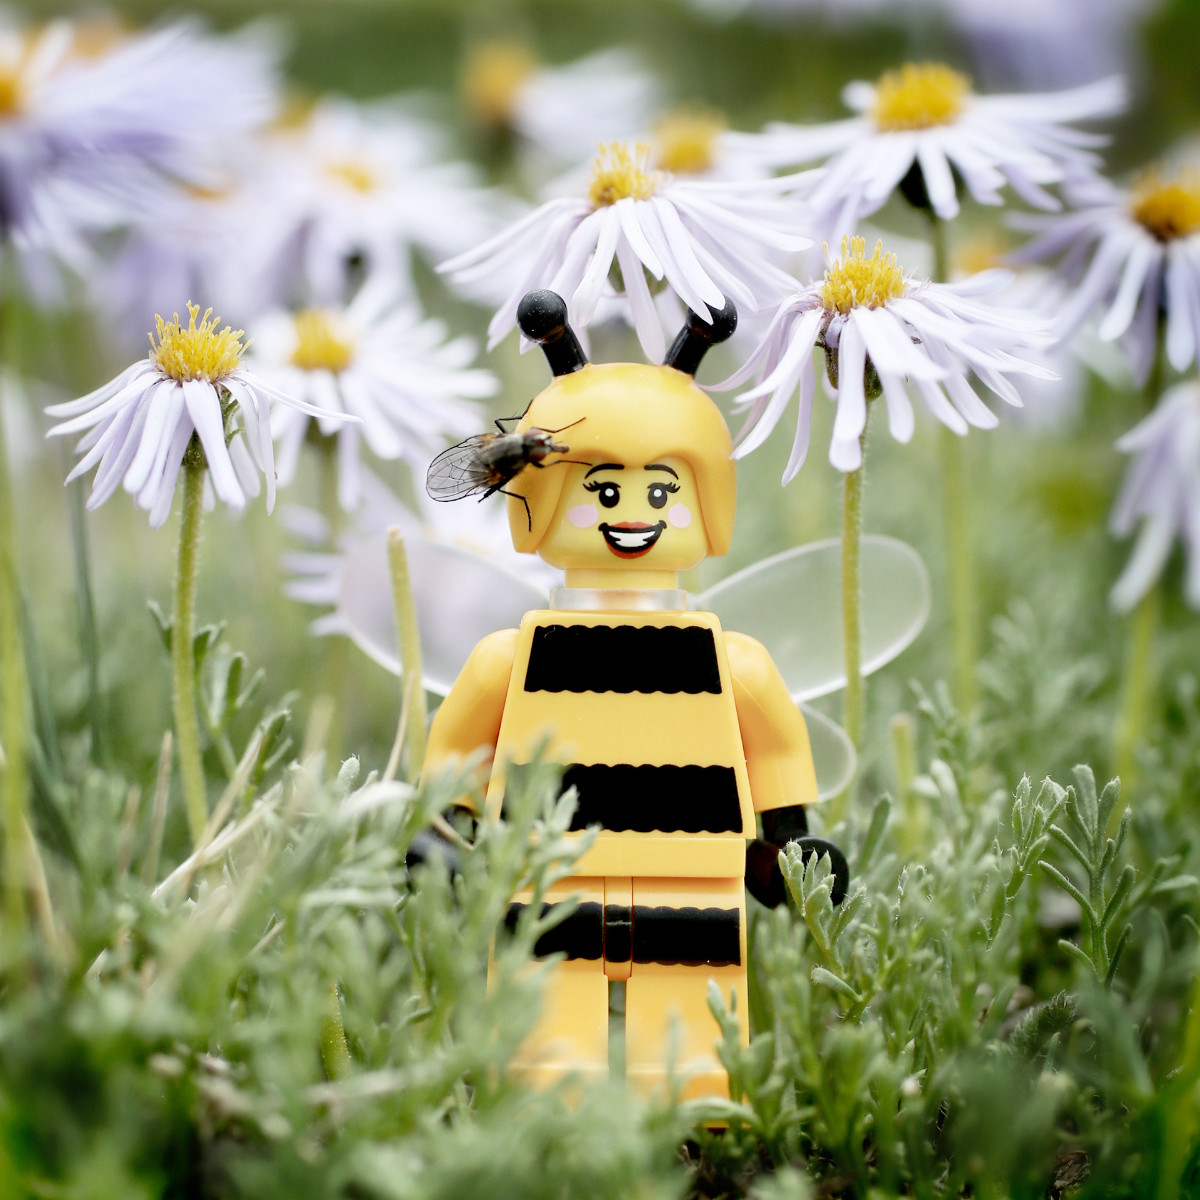 A LEGO bee stands in a field of flowers smiling while a fly has landed on her head.